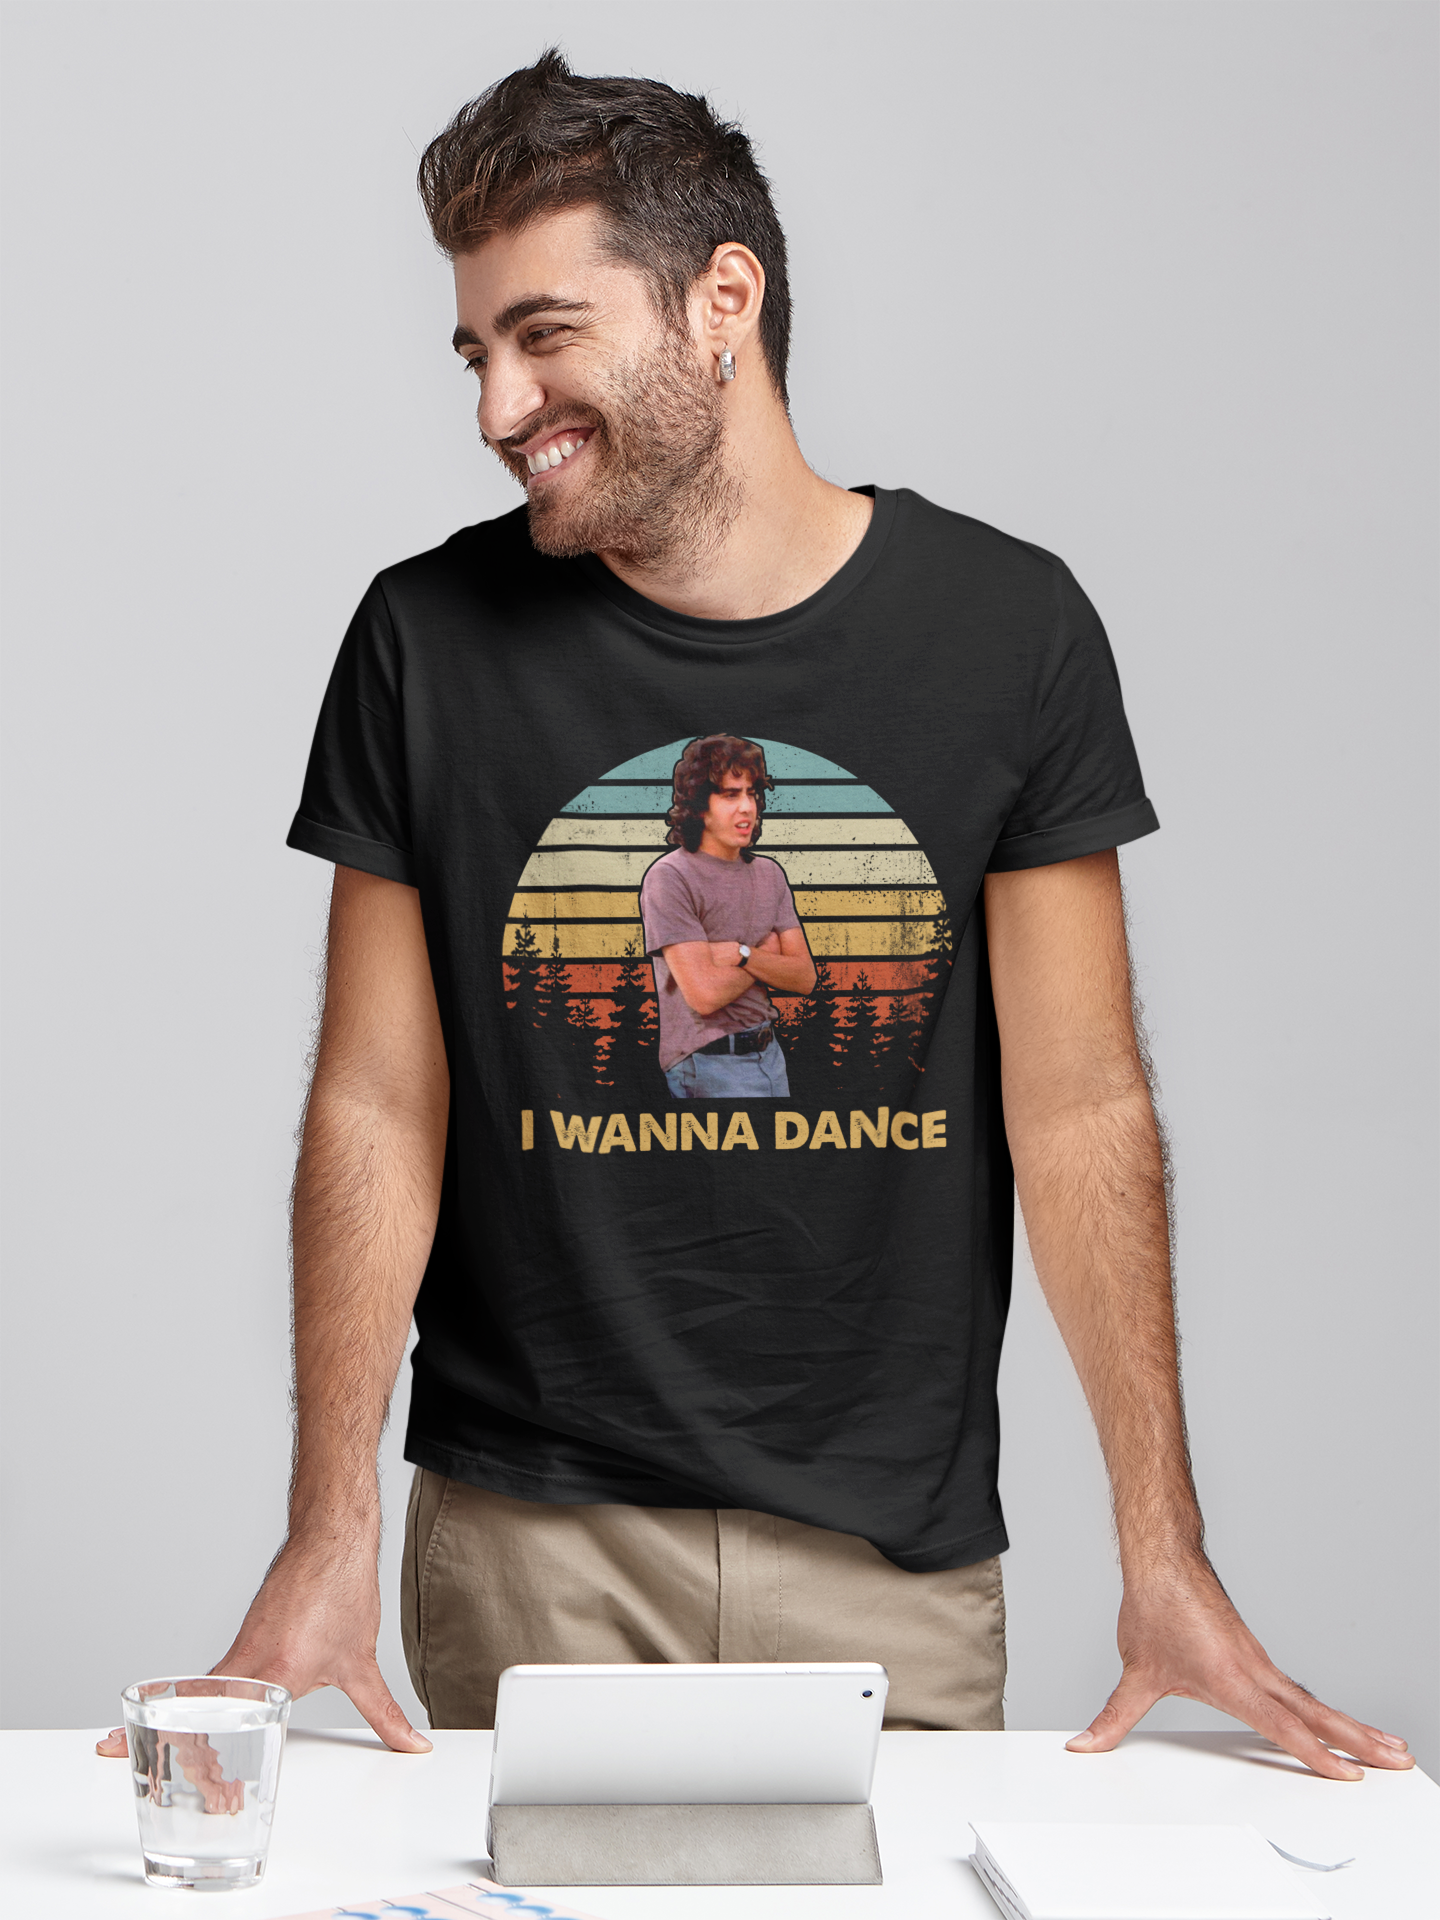 Dazed And Confused T Shirt, Mike Newhouse T Shirt, I Wanna Dance Tshirt